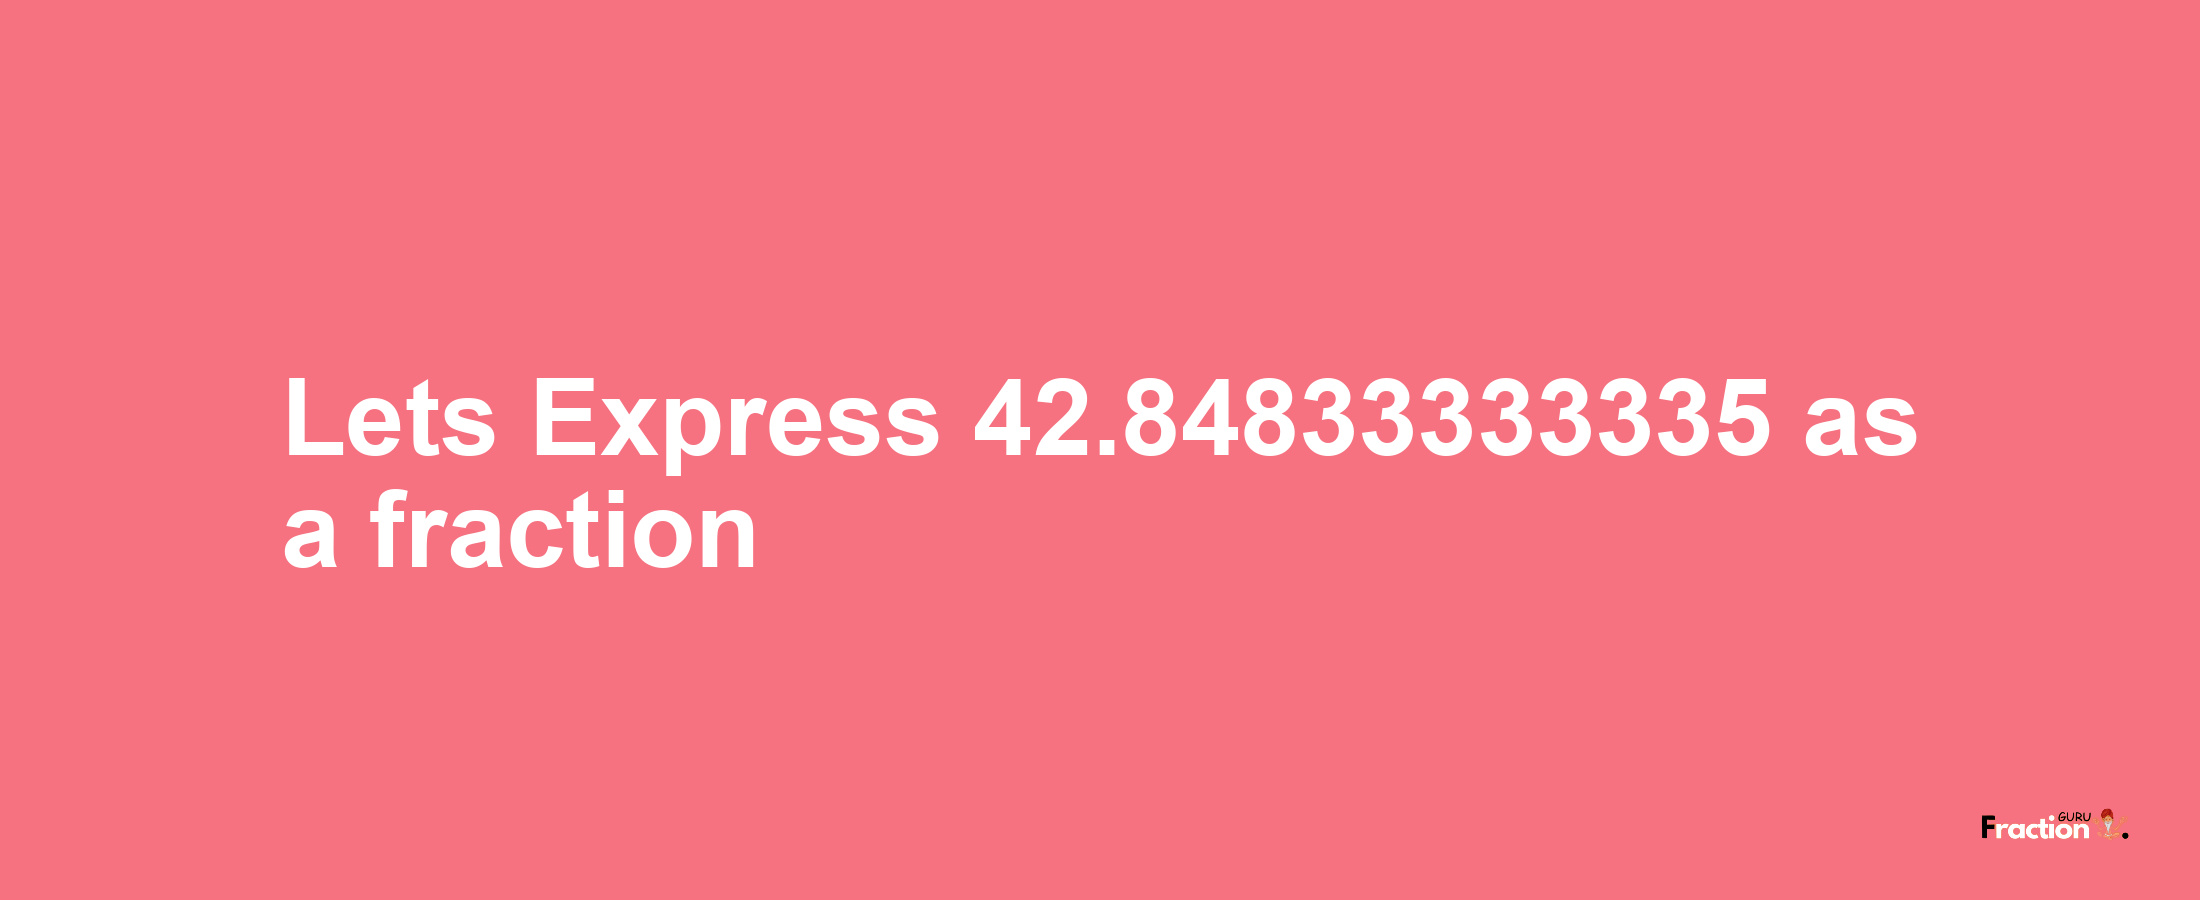 Lets Express 42.84833333335 as afraction